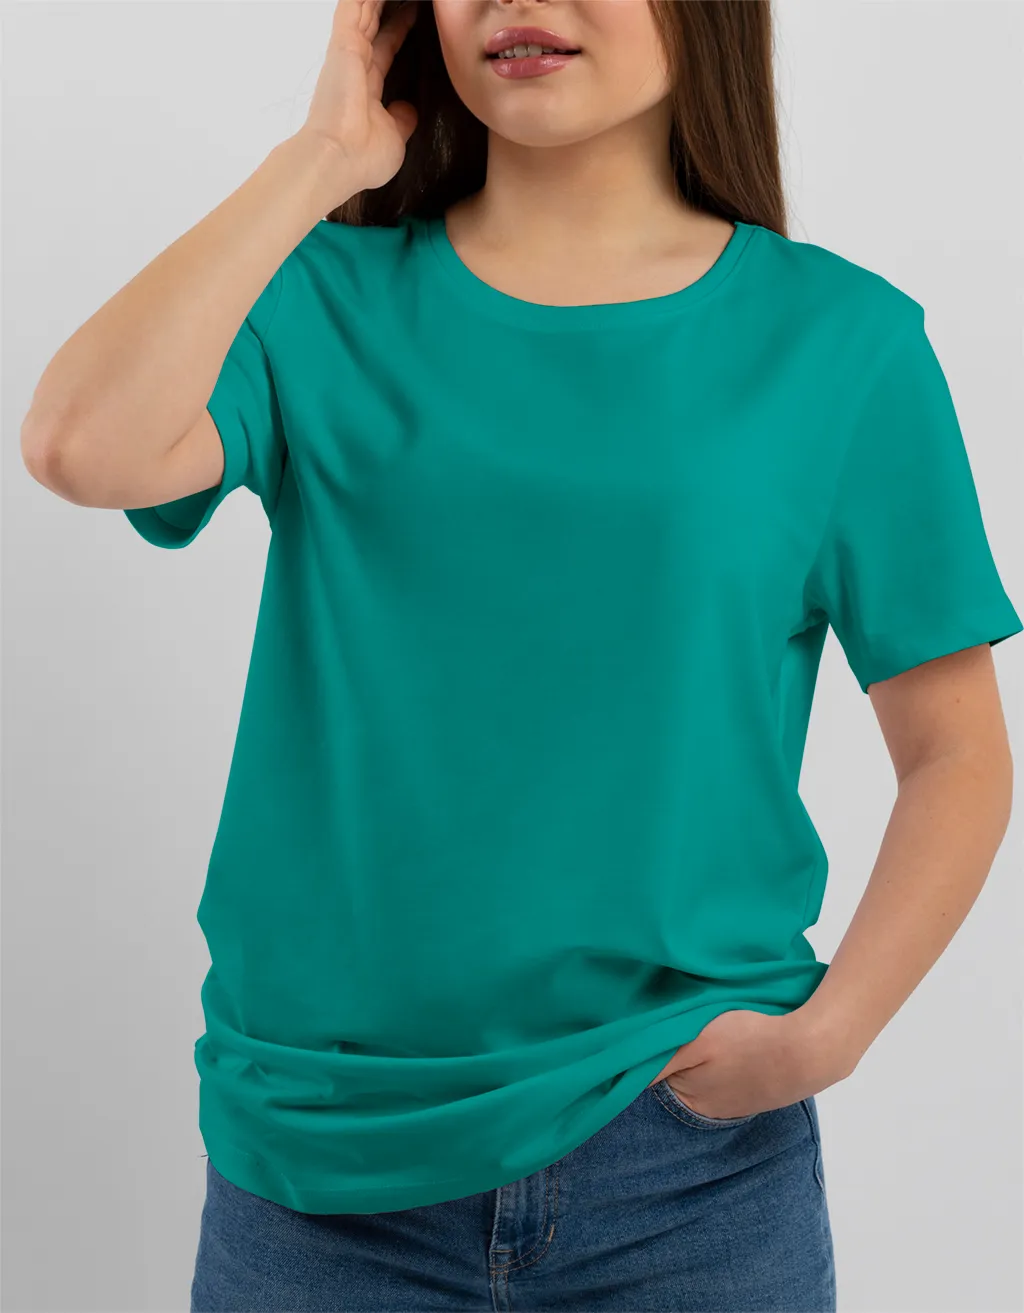 stylish teal blue t shirt for mens online shopping franky bros brand